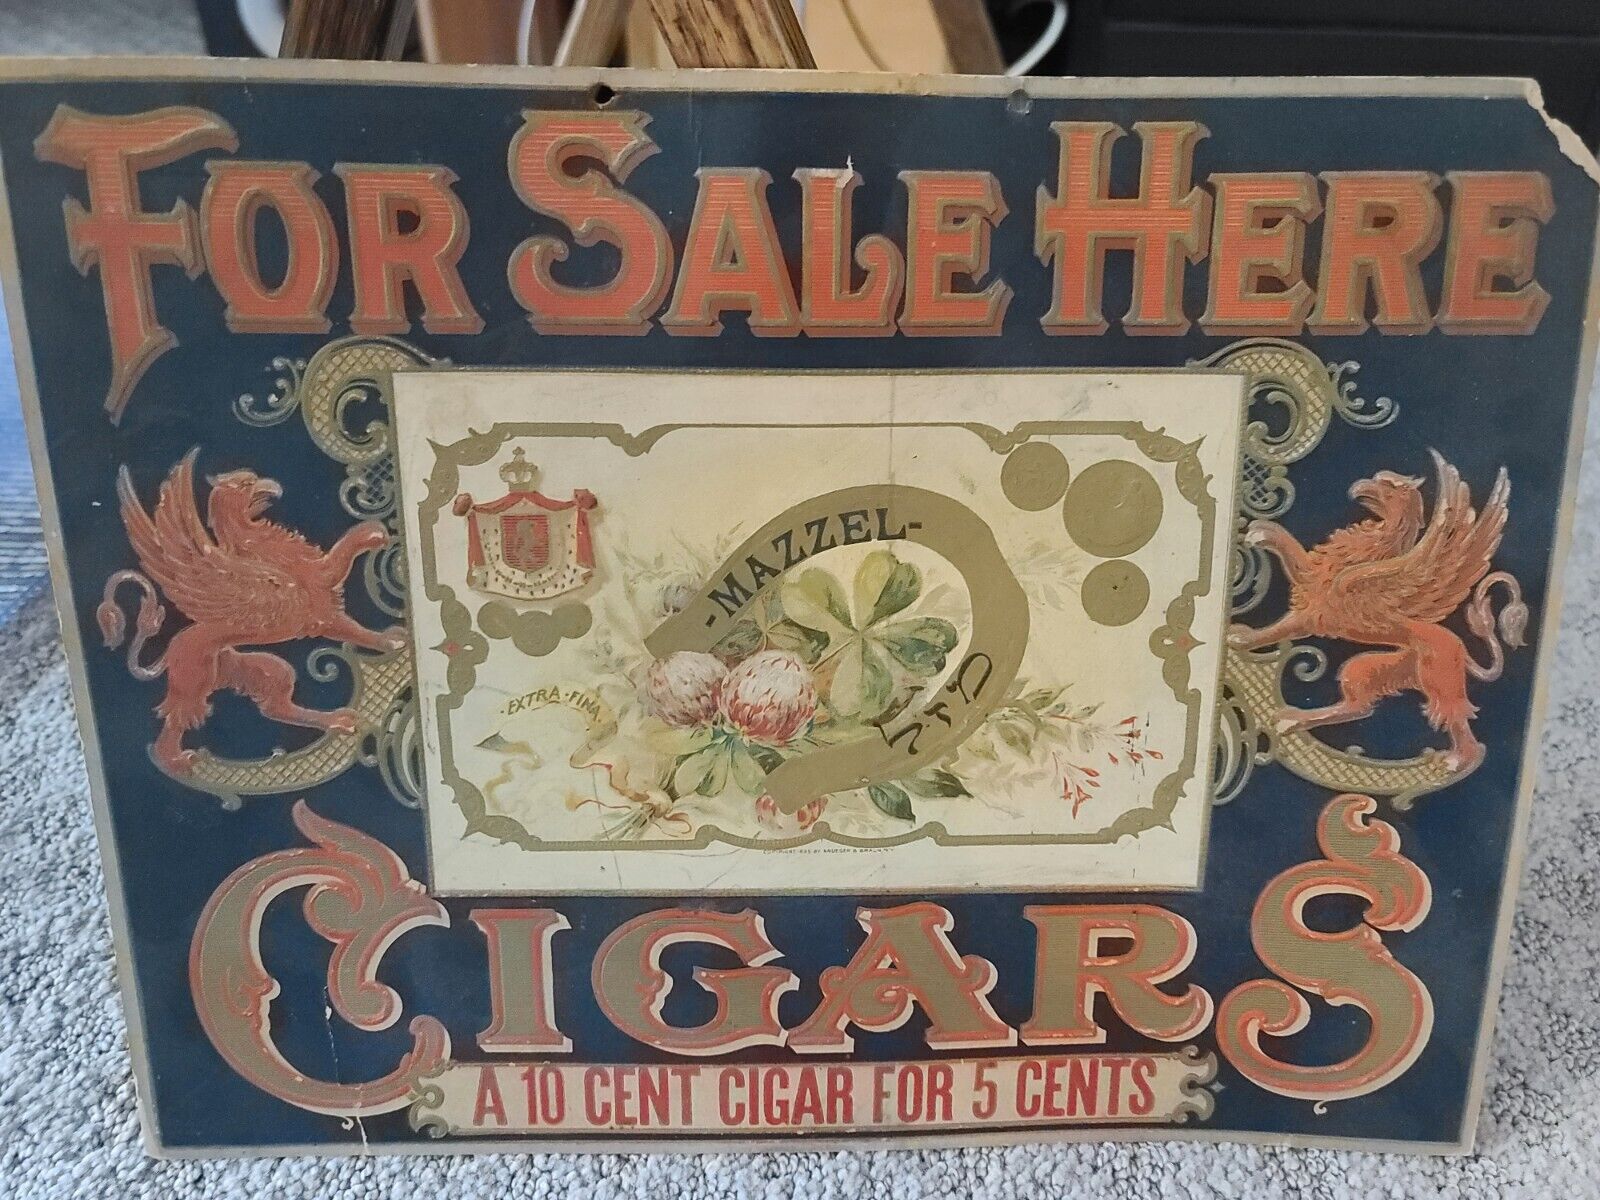 Vintage Mazzel Cigars For Sale Here Sign - Hand Painted